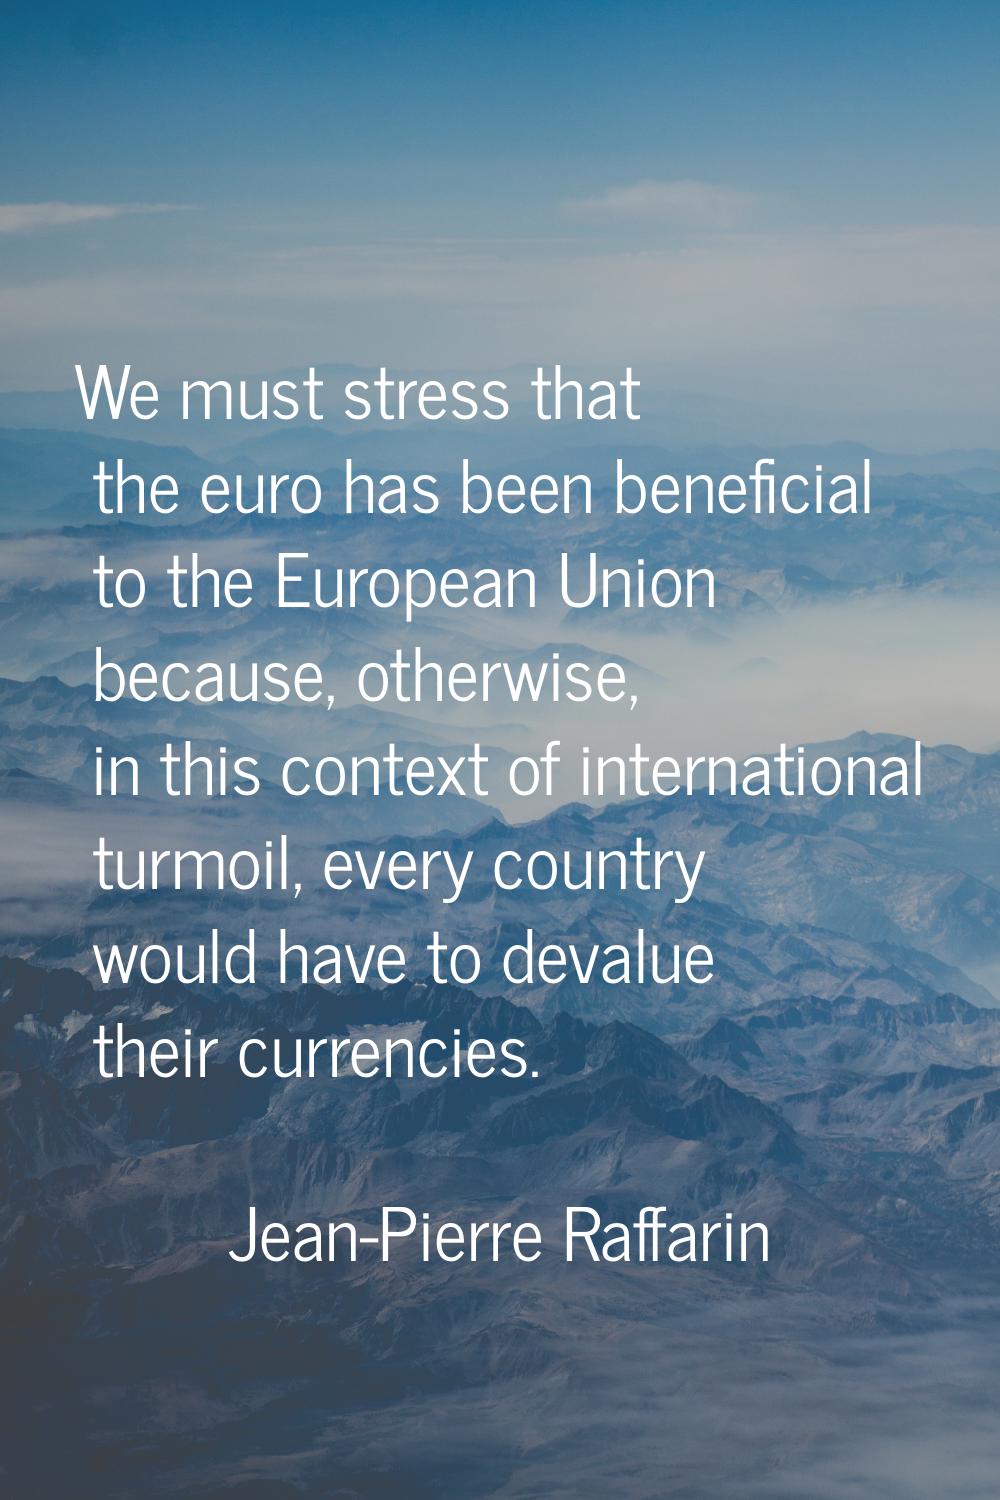 We must stress that the euro has been beneficial to the European Union because, otherwise, in this 